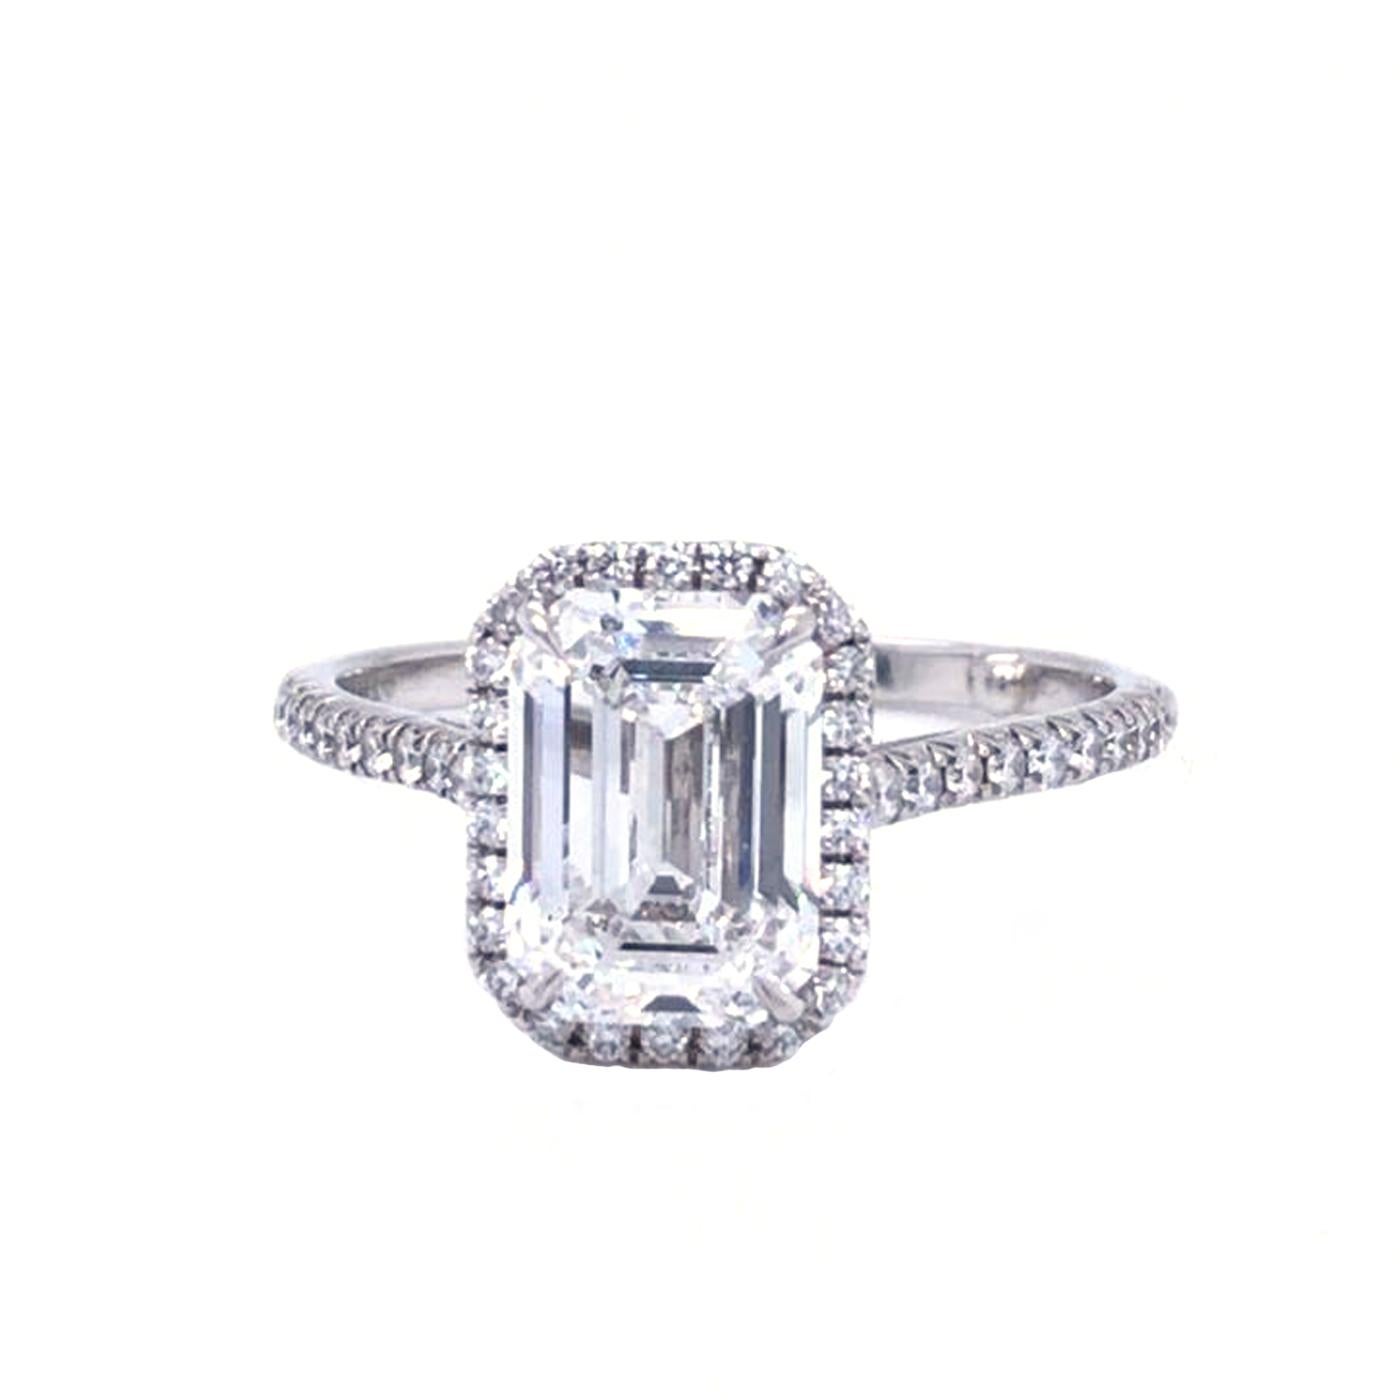 Tiffany & Co. Solitaire  2.63ct Emerald-cut Halo Diamond Platinum Engagement Ring Band

About:
One Tiffany & Co. platinum and diamond solitaire Tiffany Soleste ring, prong set with one emerald cut diamond weighing 2.63 carats, E color, VS1 clarity,